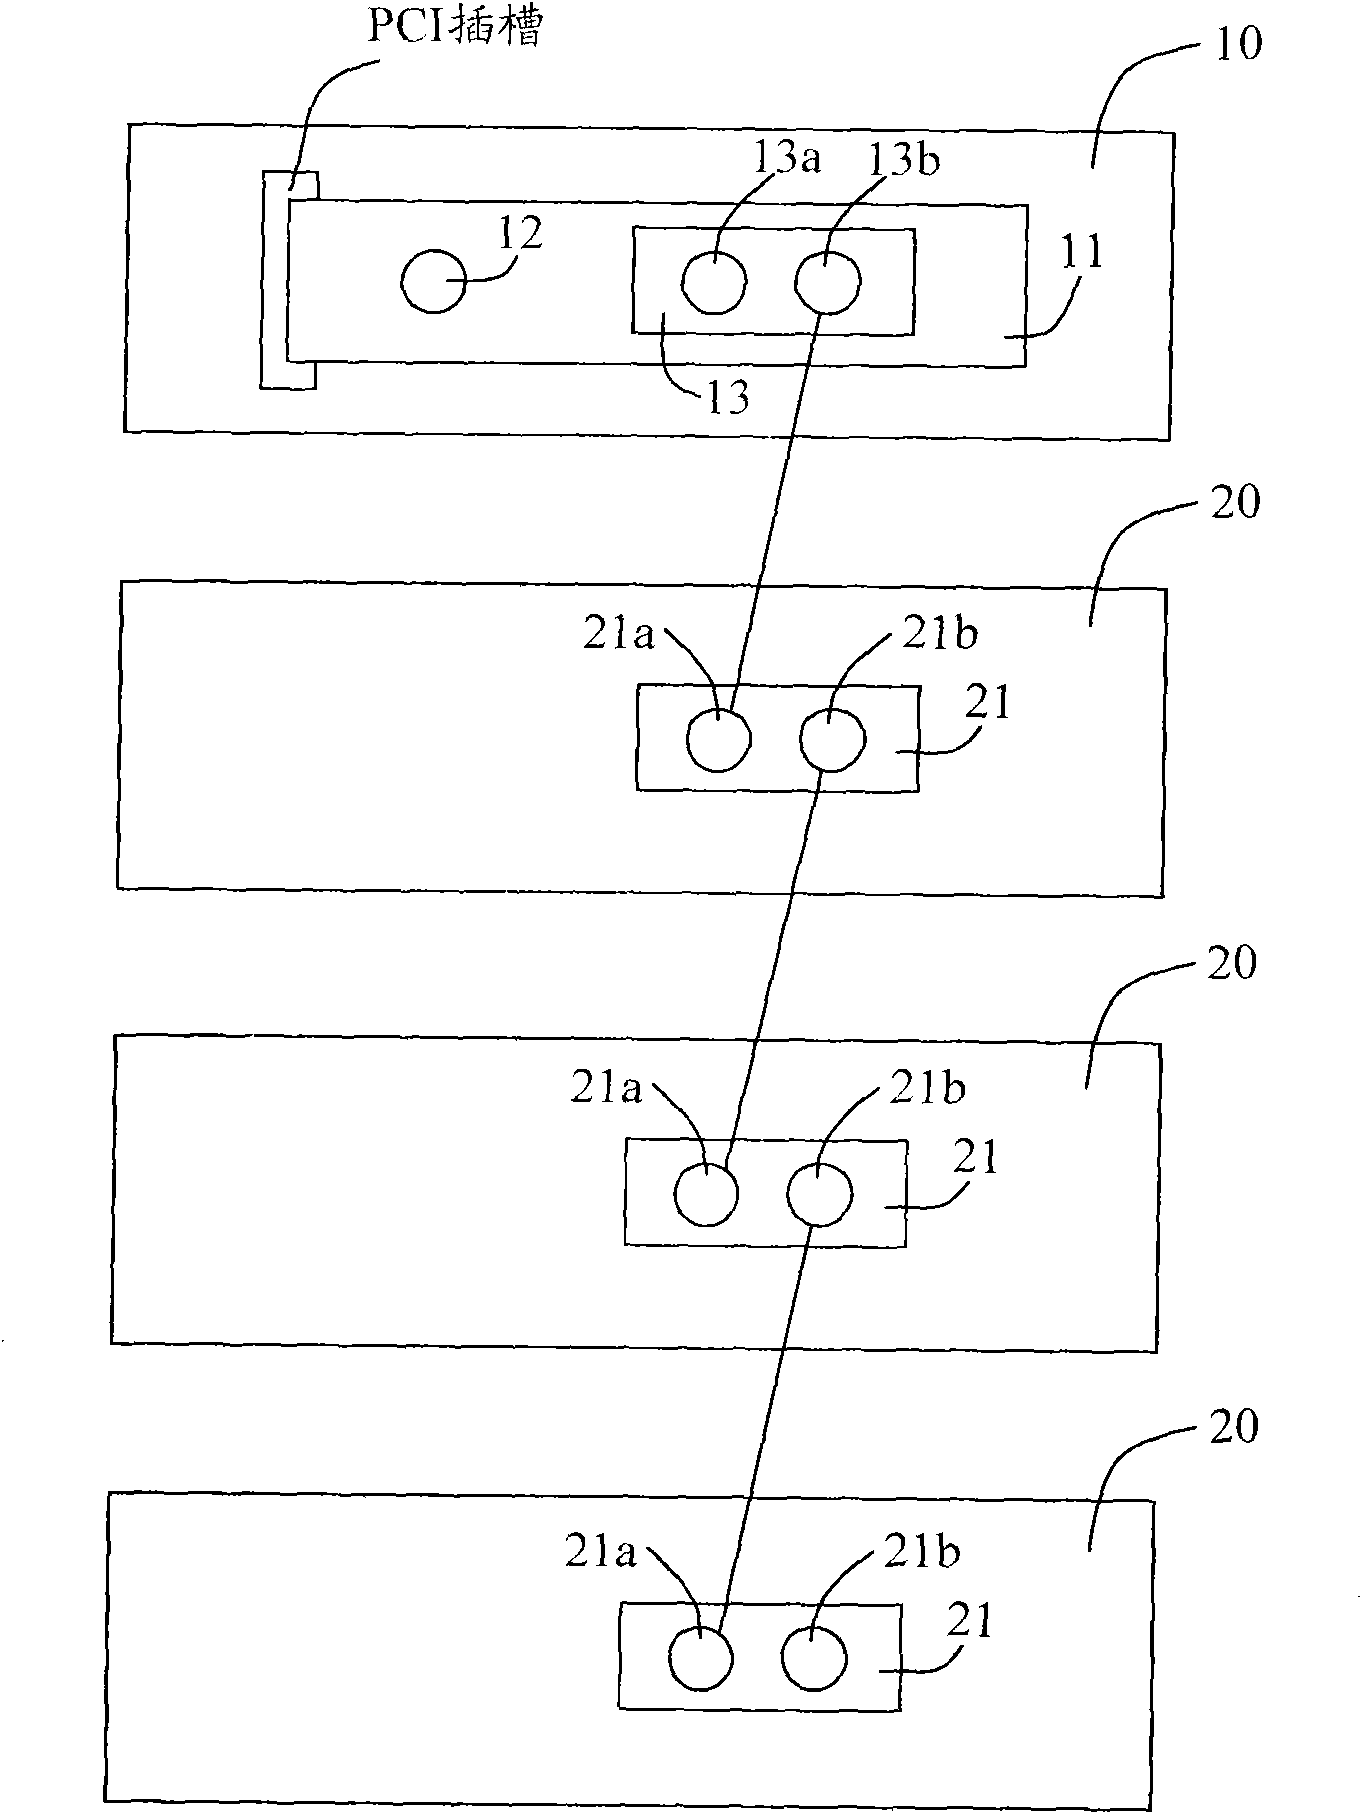 Startup and shutdown time sequence control device for magnetic disk array storage system